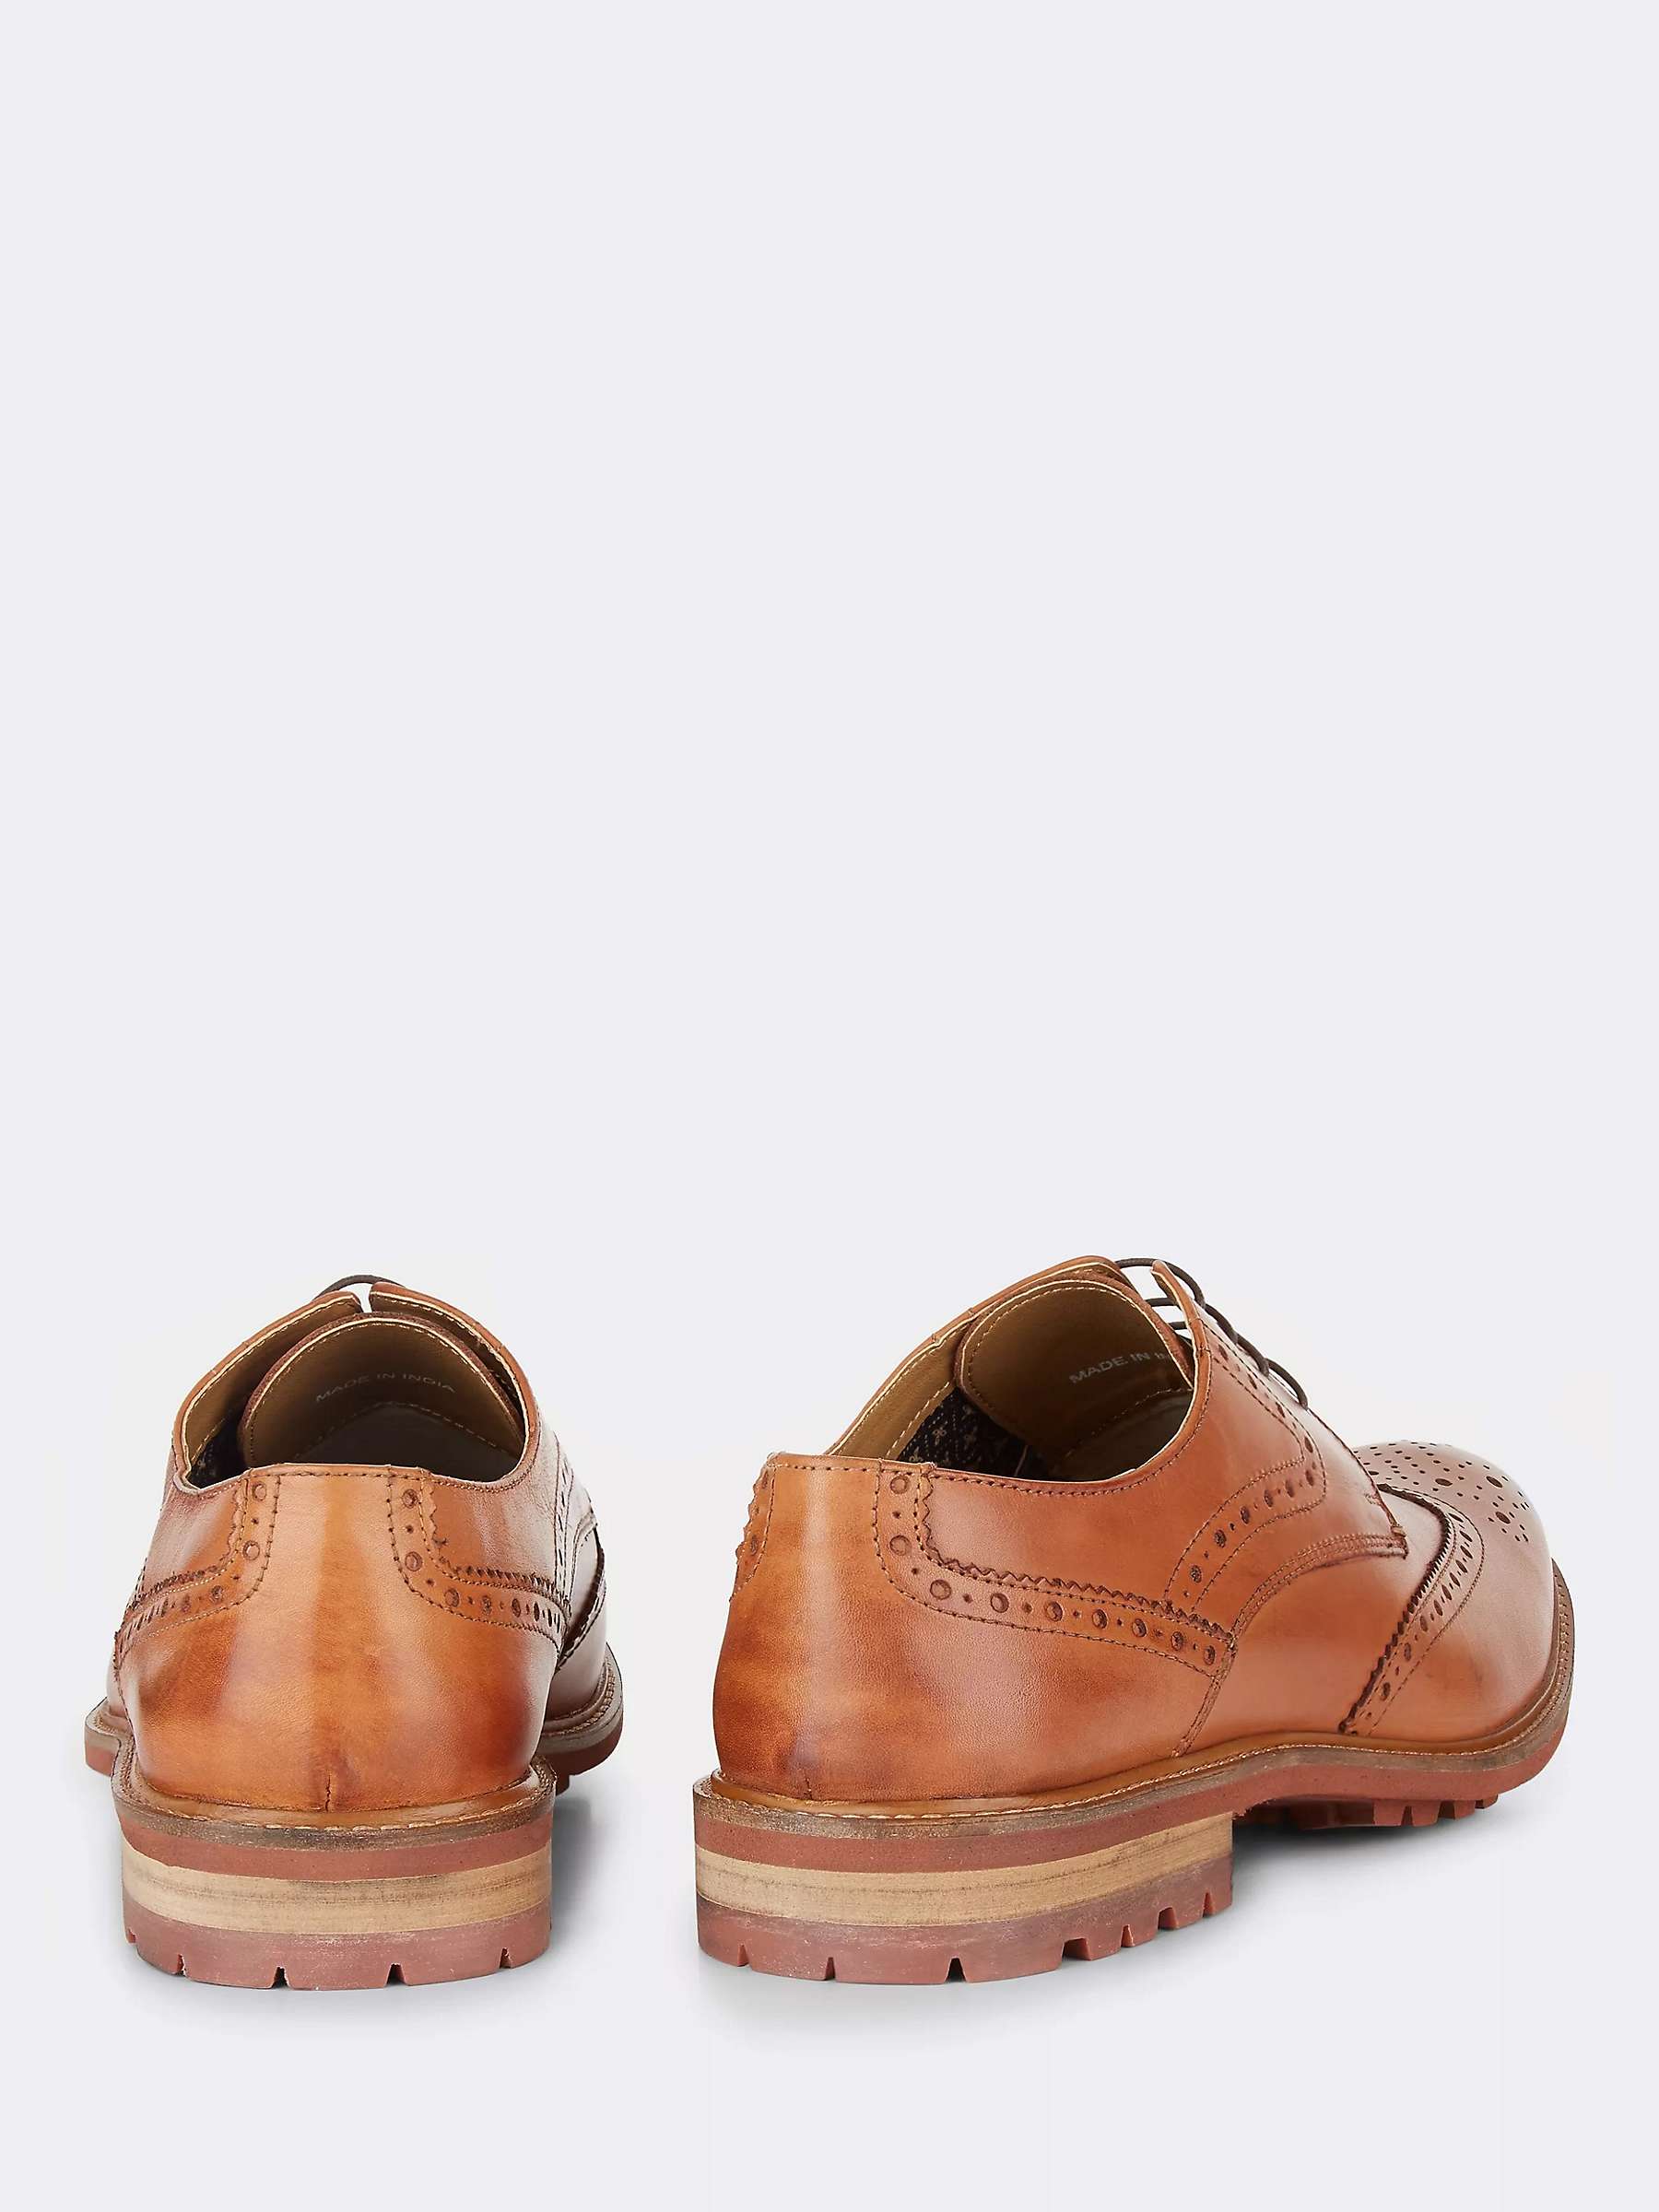 Buy Moss Bray Leather Brogues, Tan Online at johnlewis.com